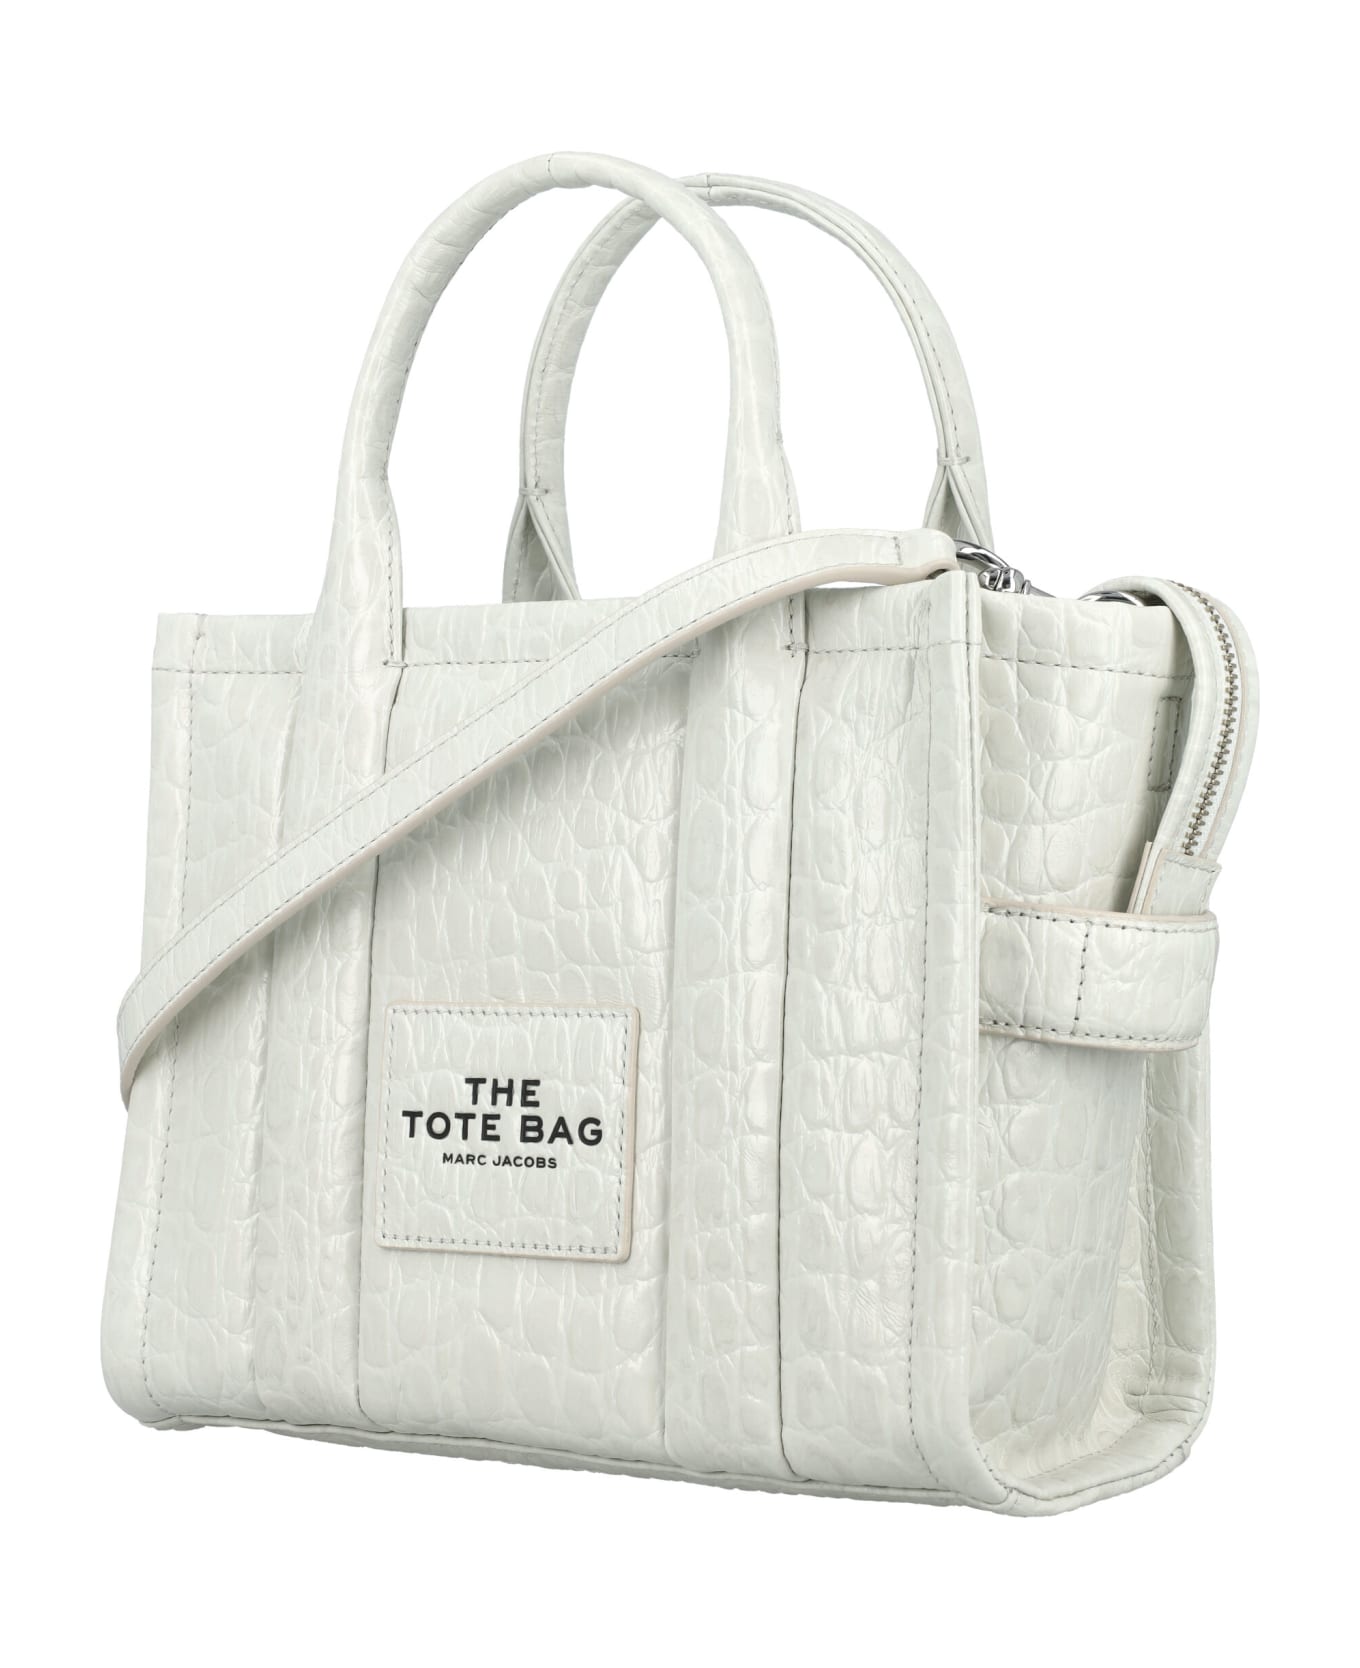 Marc Jacobs The Tote Bag - IVORY トートバッグ